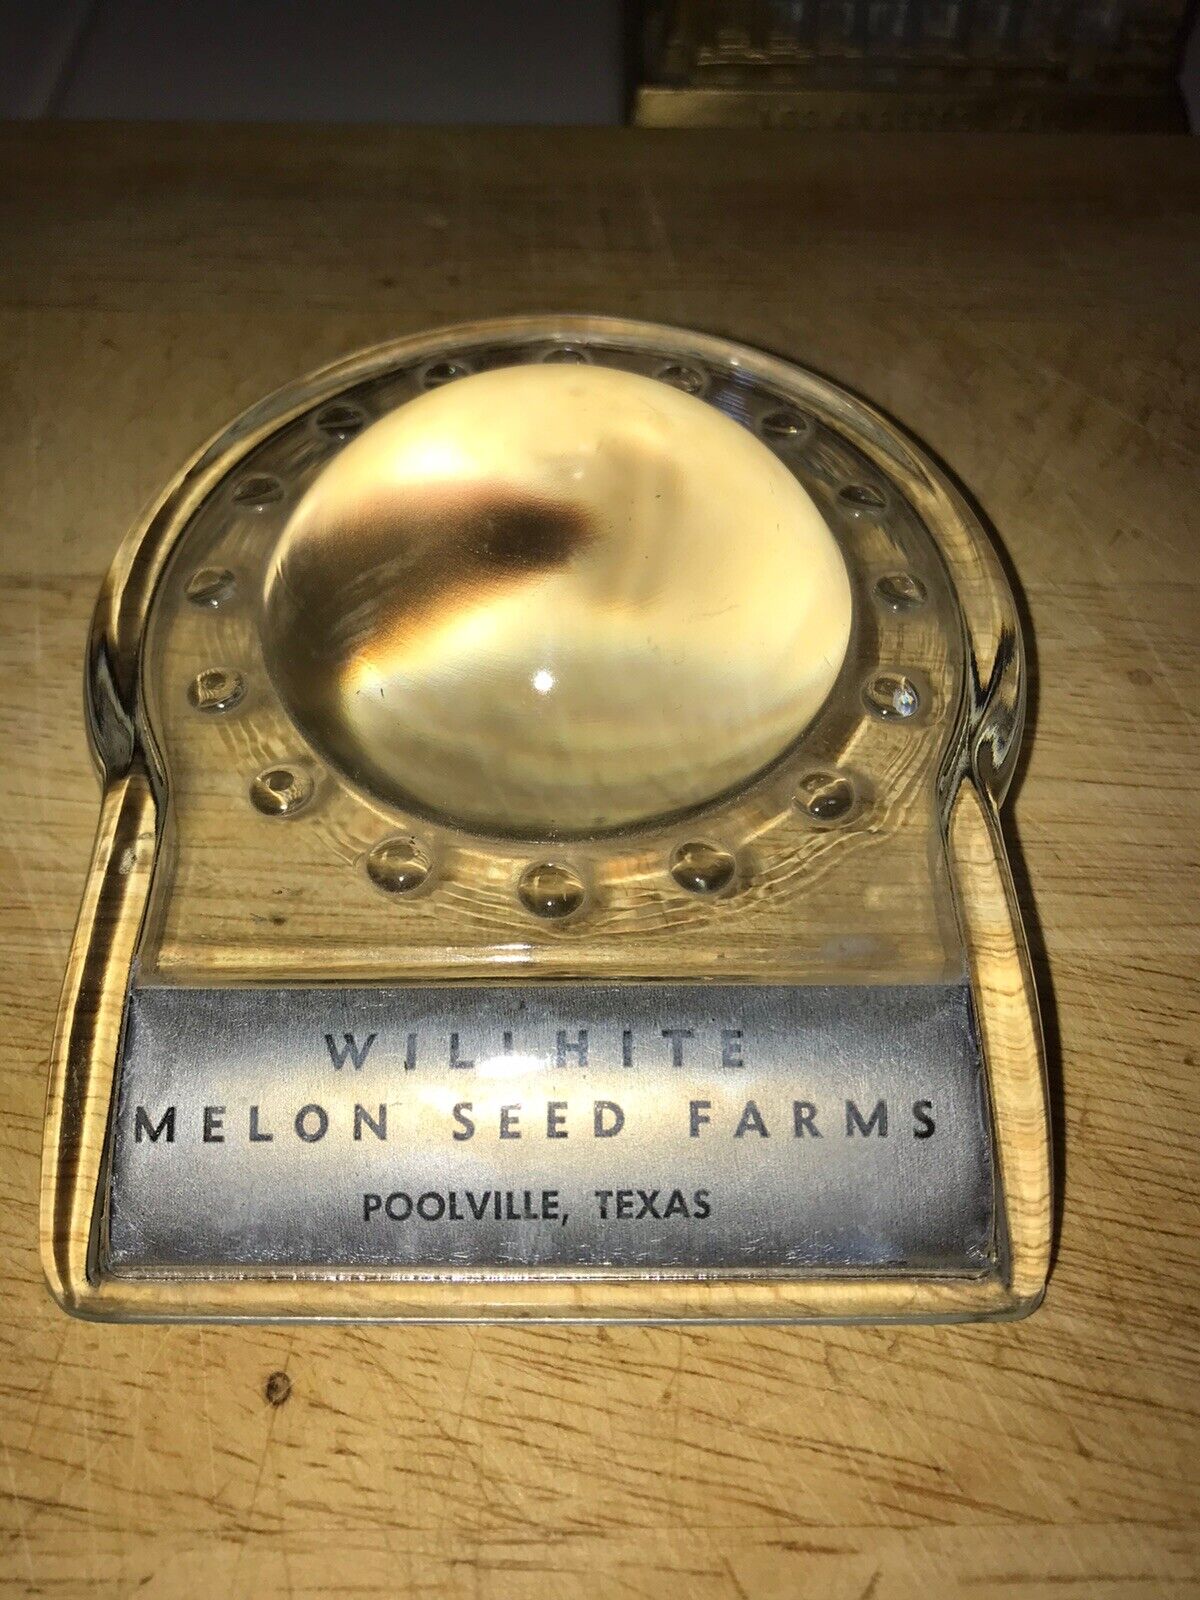 GLASS ADVERTISING PAPERWEIGHT WILLHITE MELON SEED FARMS